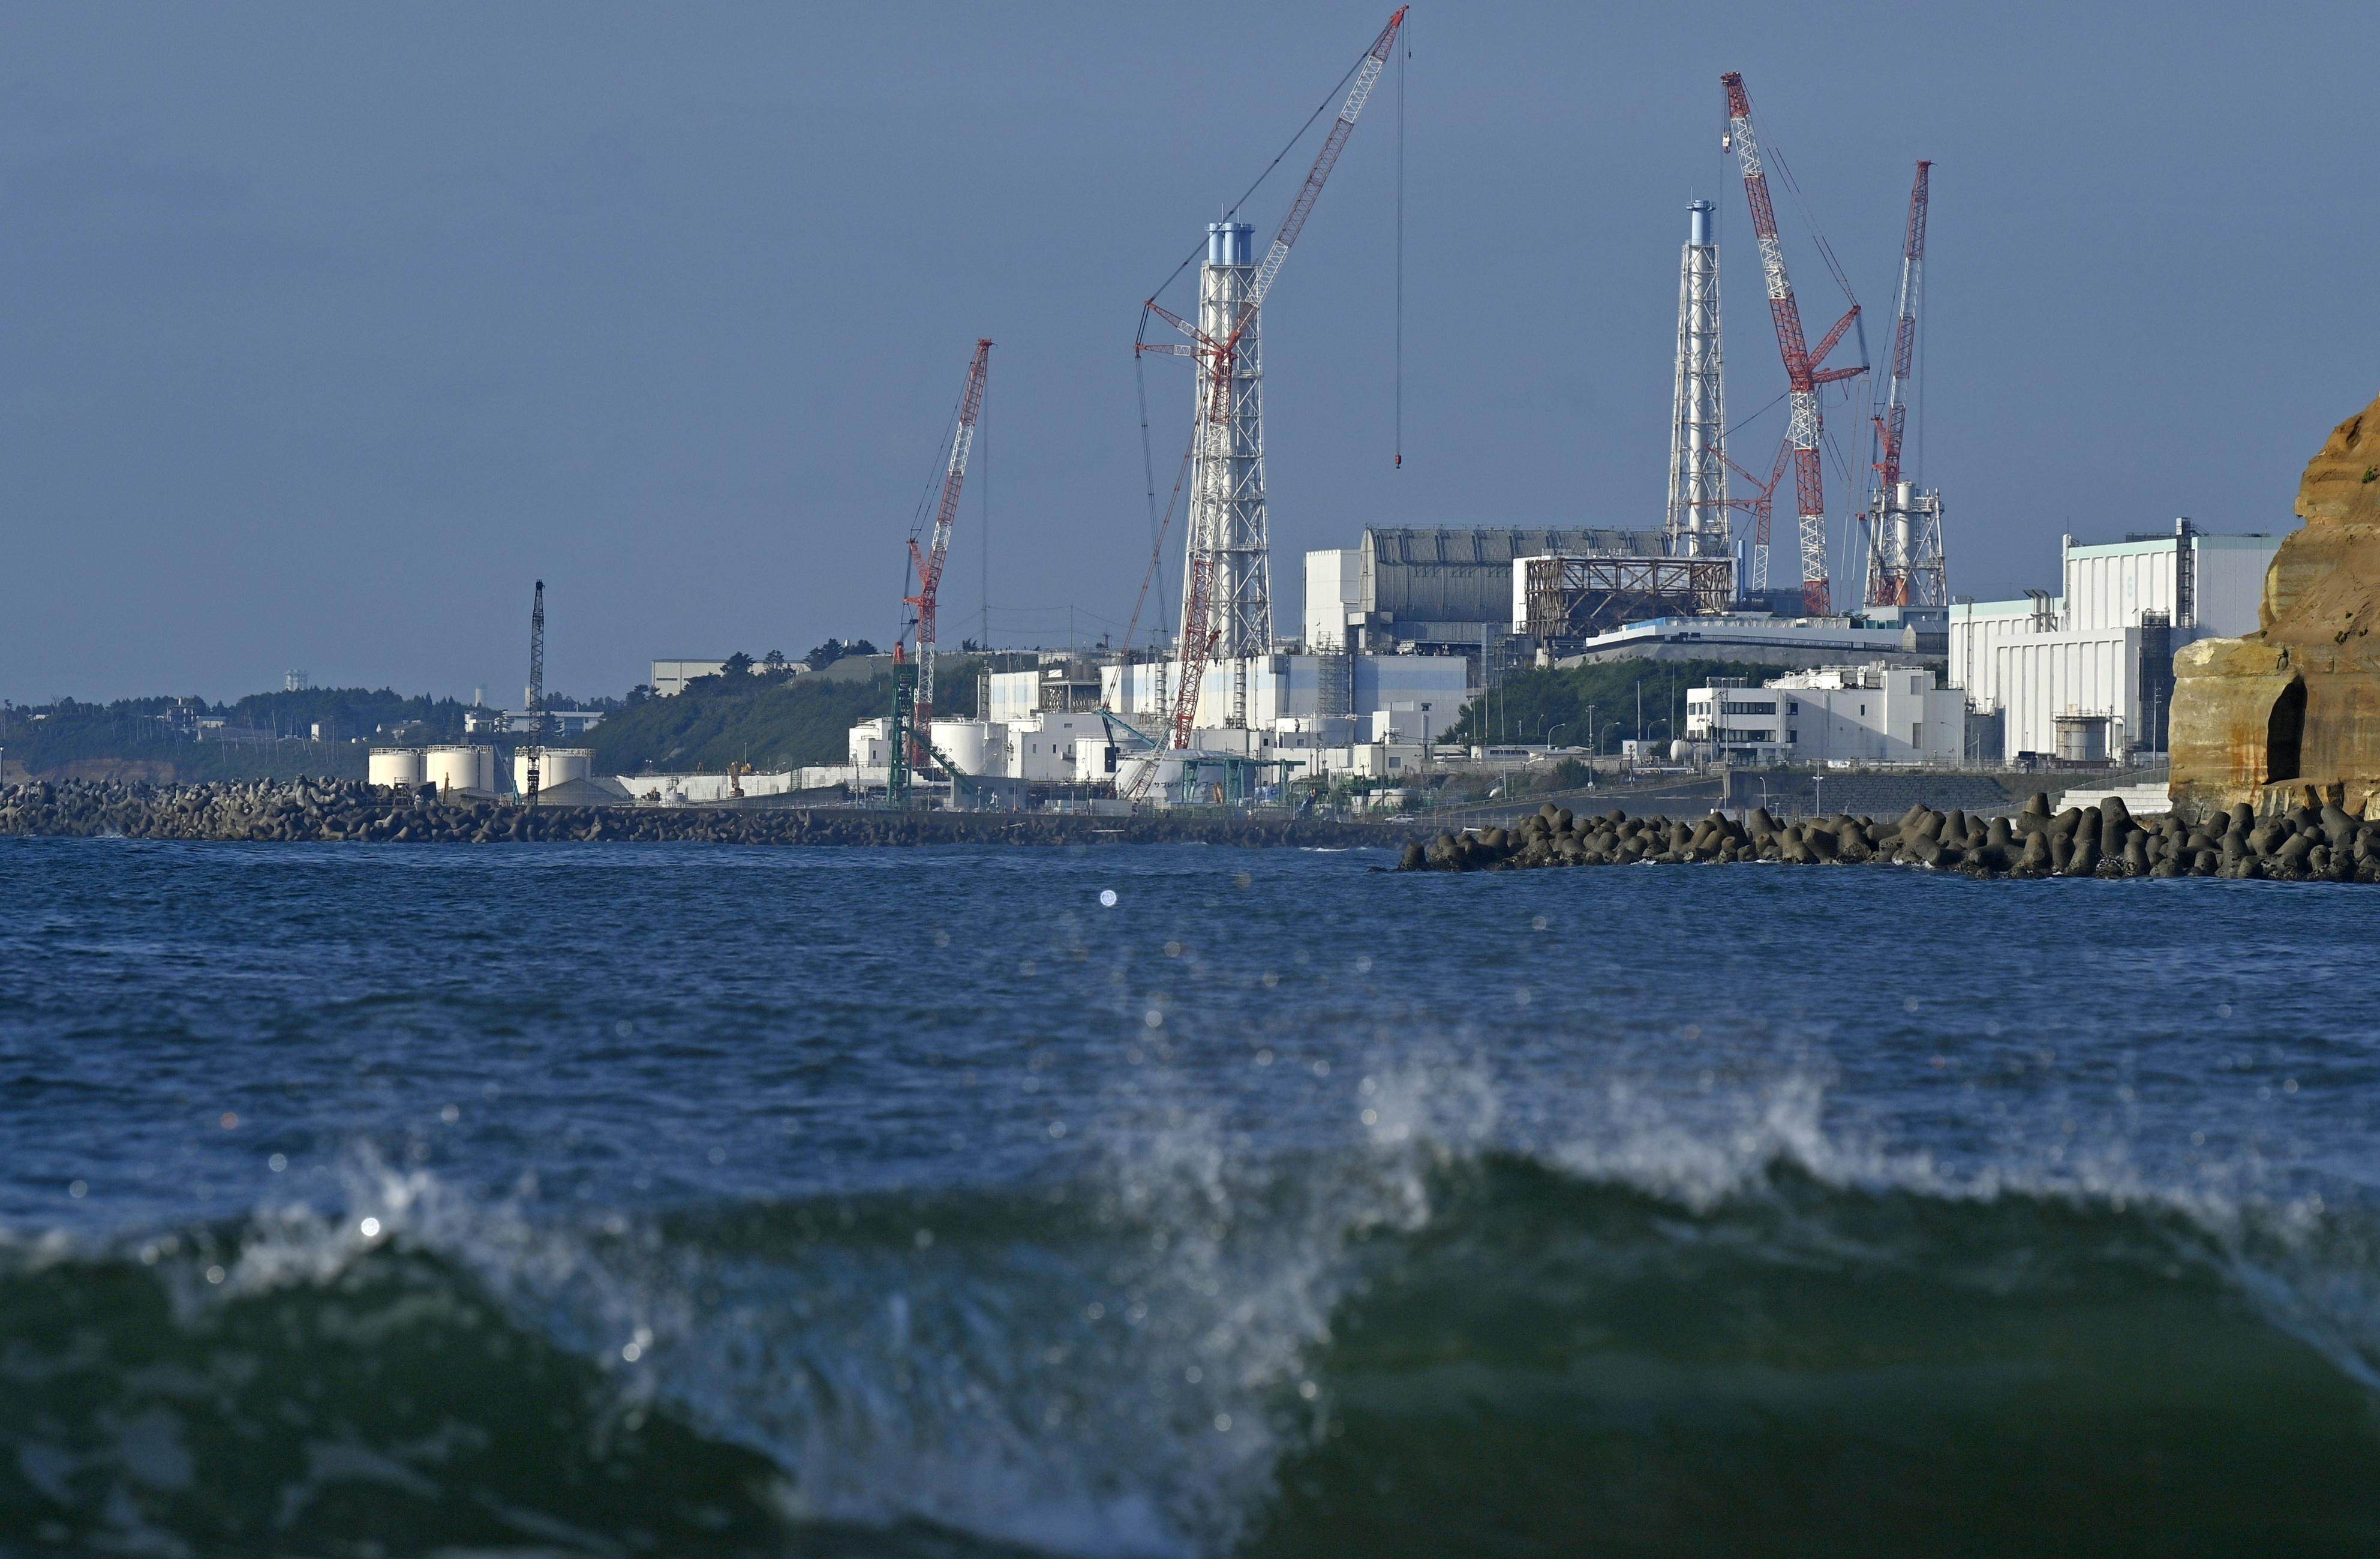 Photo taken from the town of Futaba in Fukushima Prefecture, northeastern Japan shows the Fukushima Daiichi nuclear power plant on July 4, 2023. Photo: Kyodo